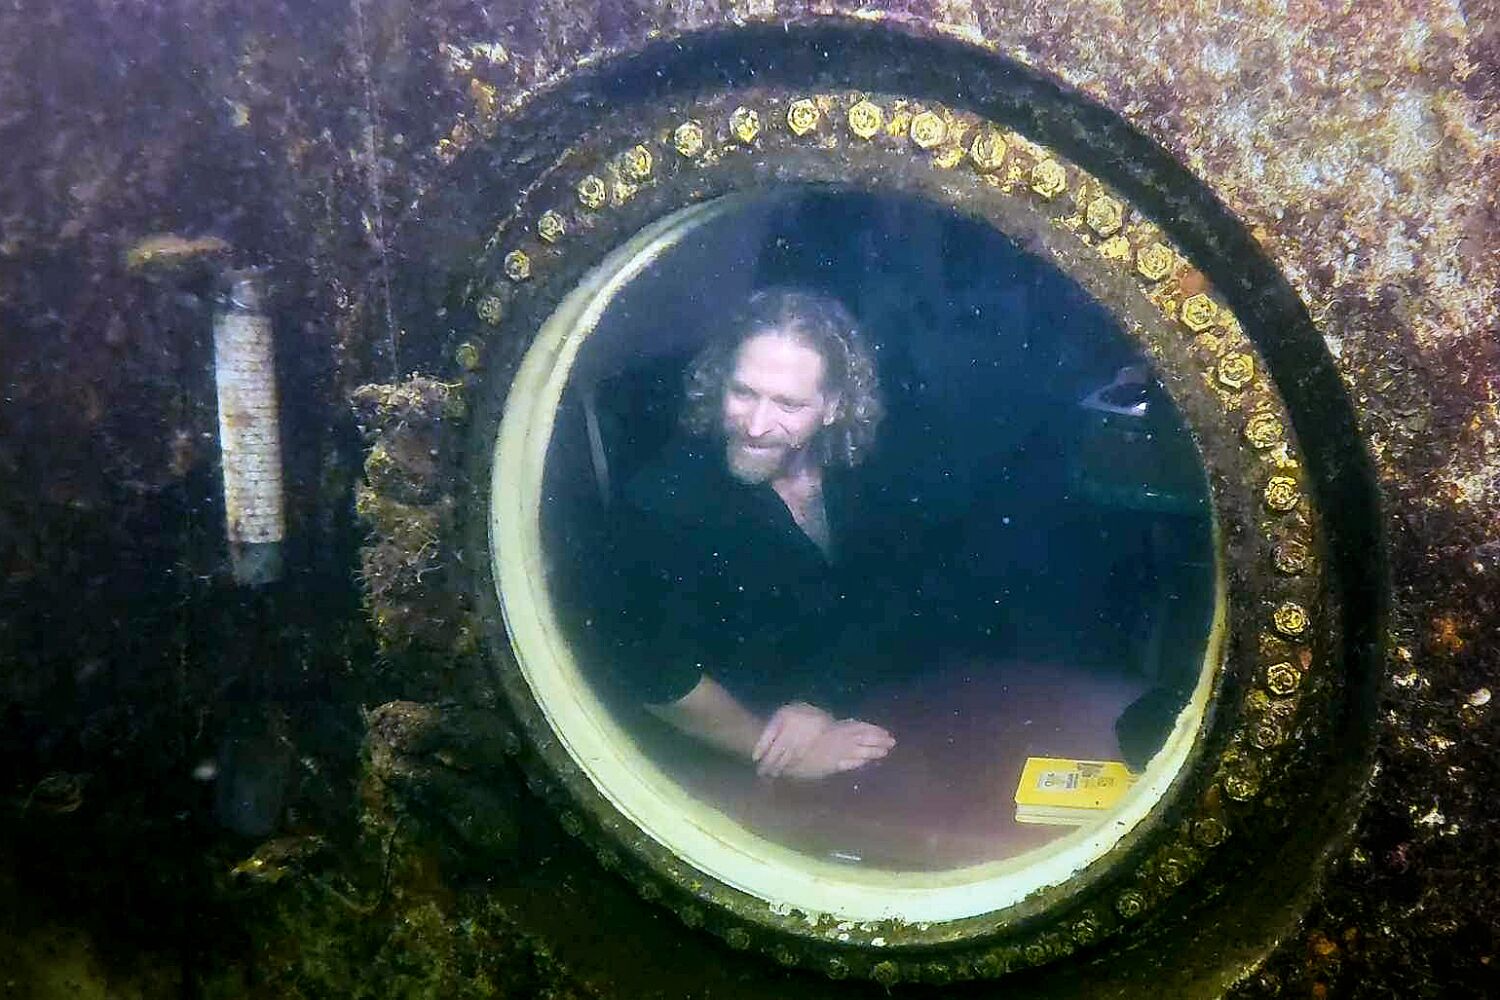 Florida teacher resides in an undersea hotel for a record 73 days. His objective? An even 100